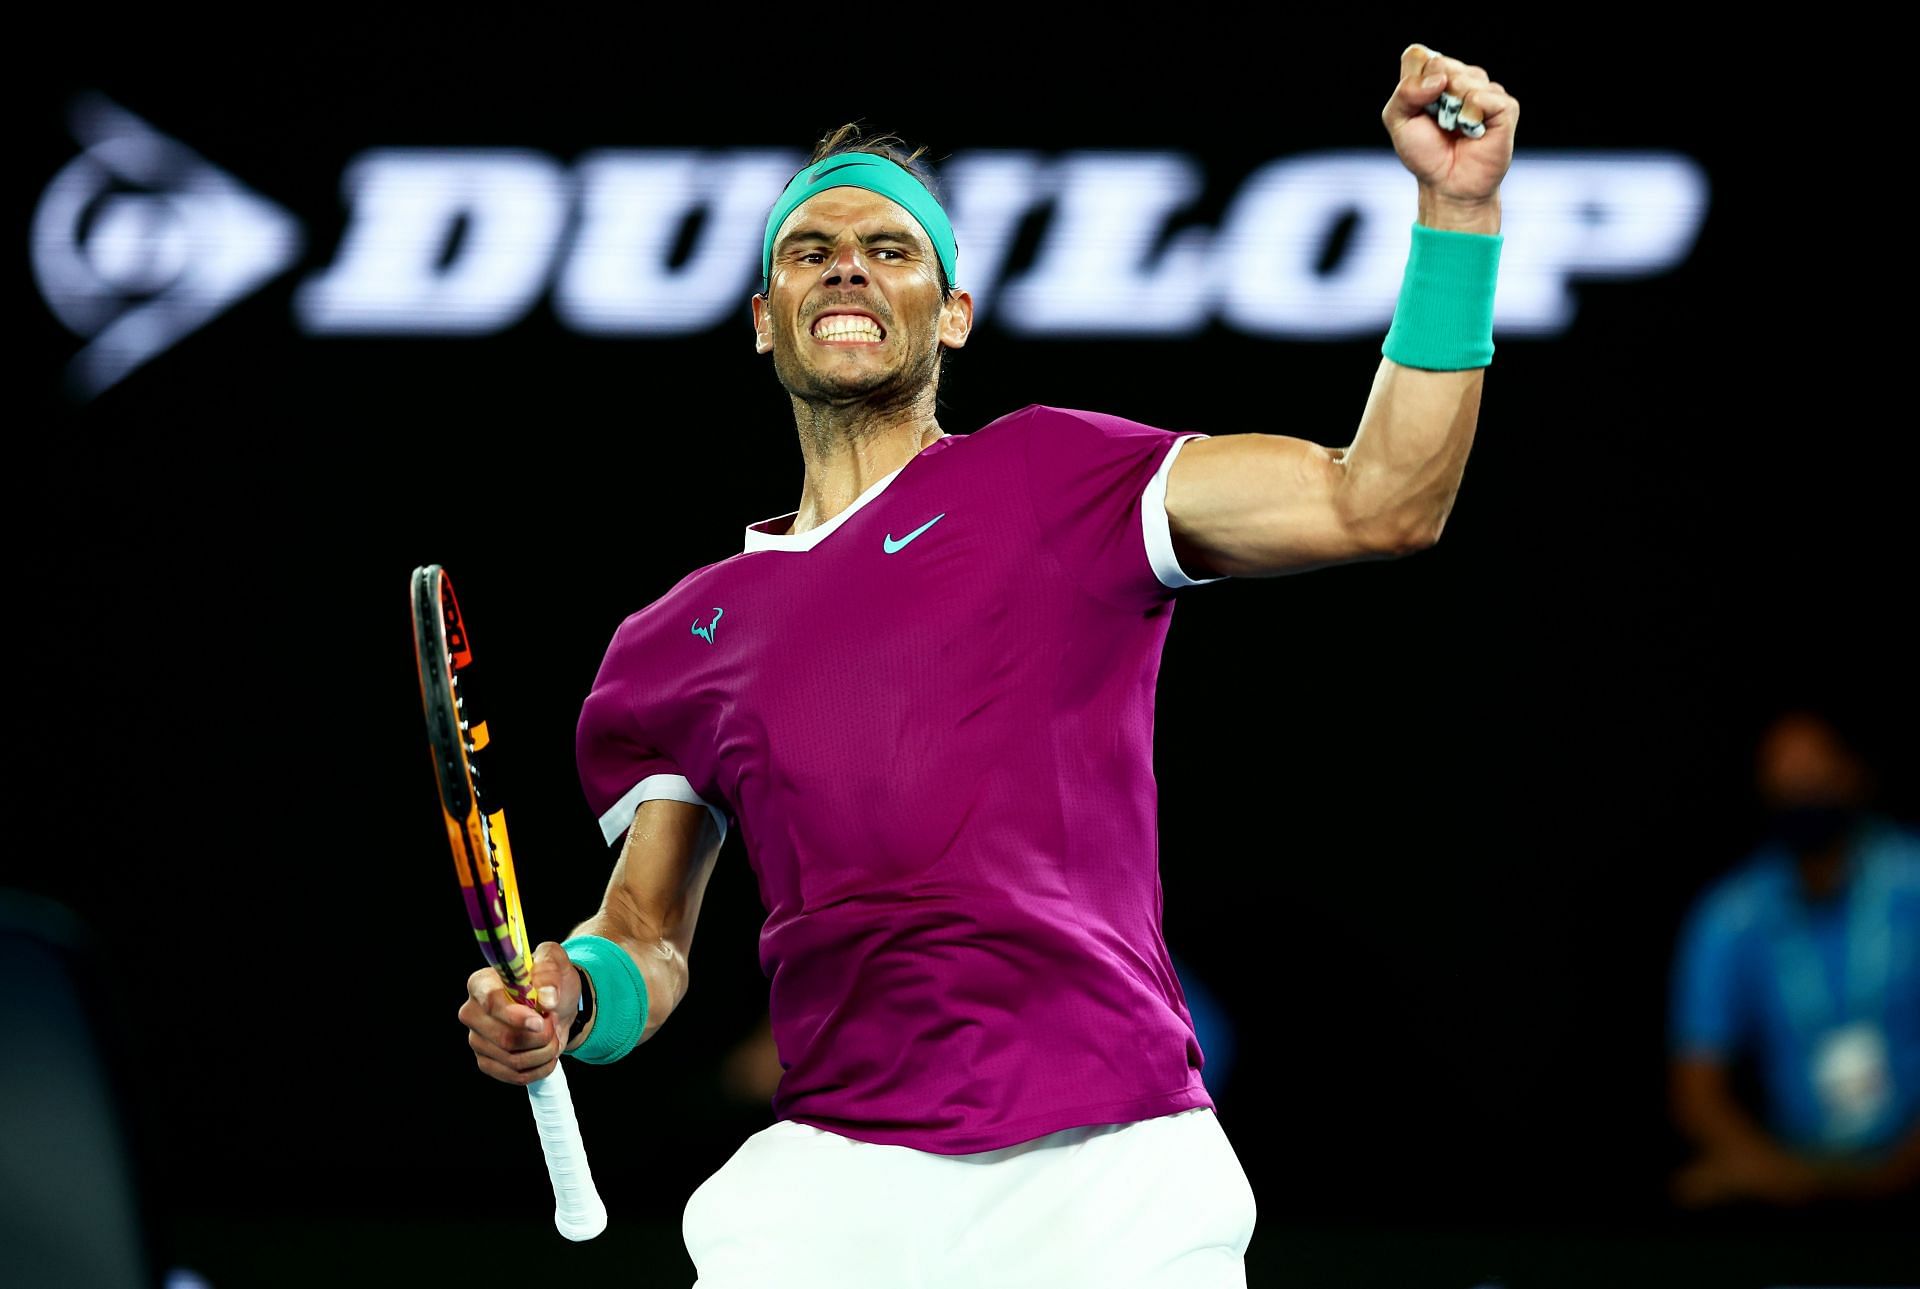 Rafael Nadal in action during the 2022 Australian Open